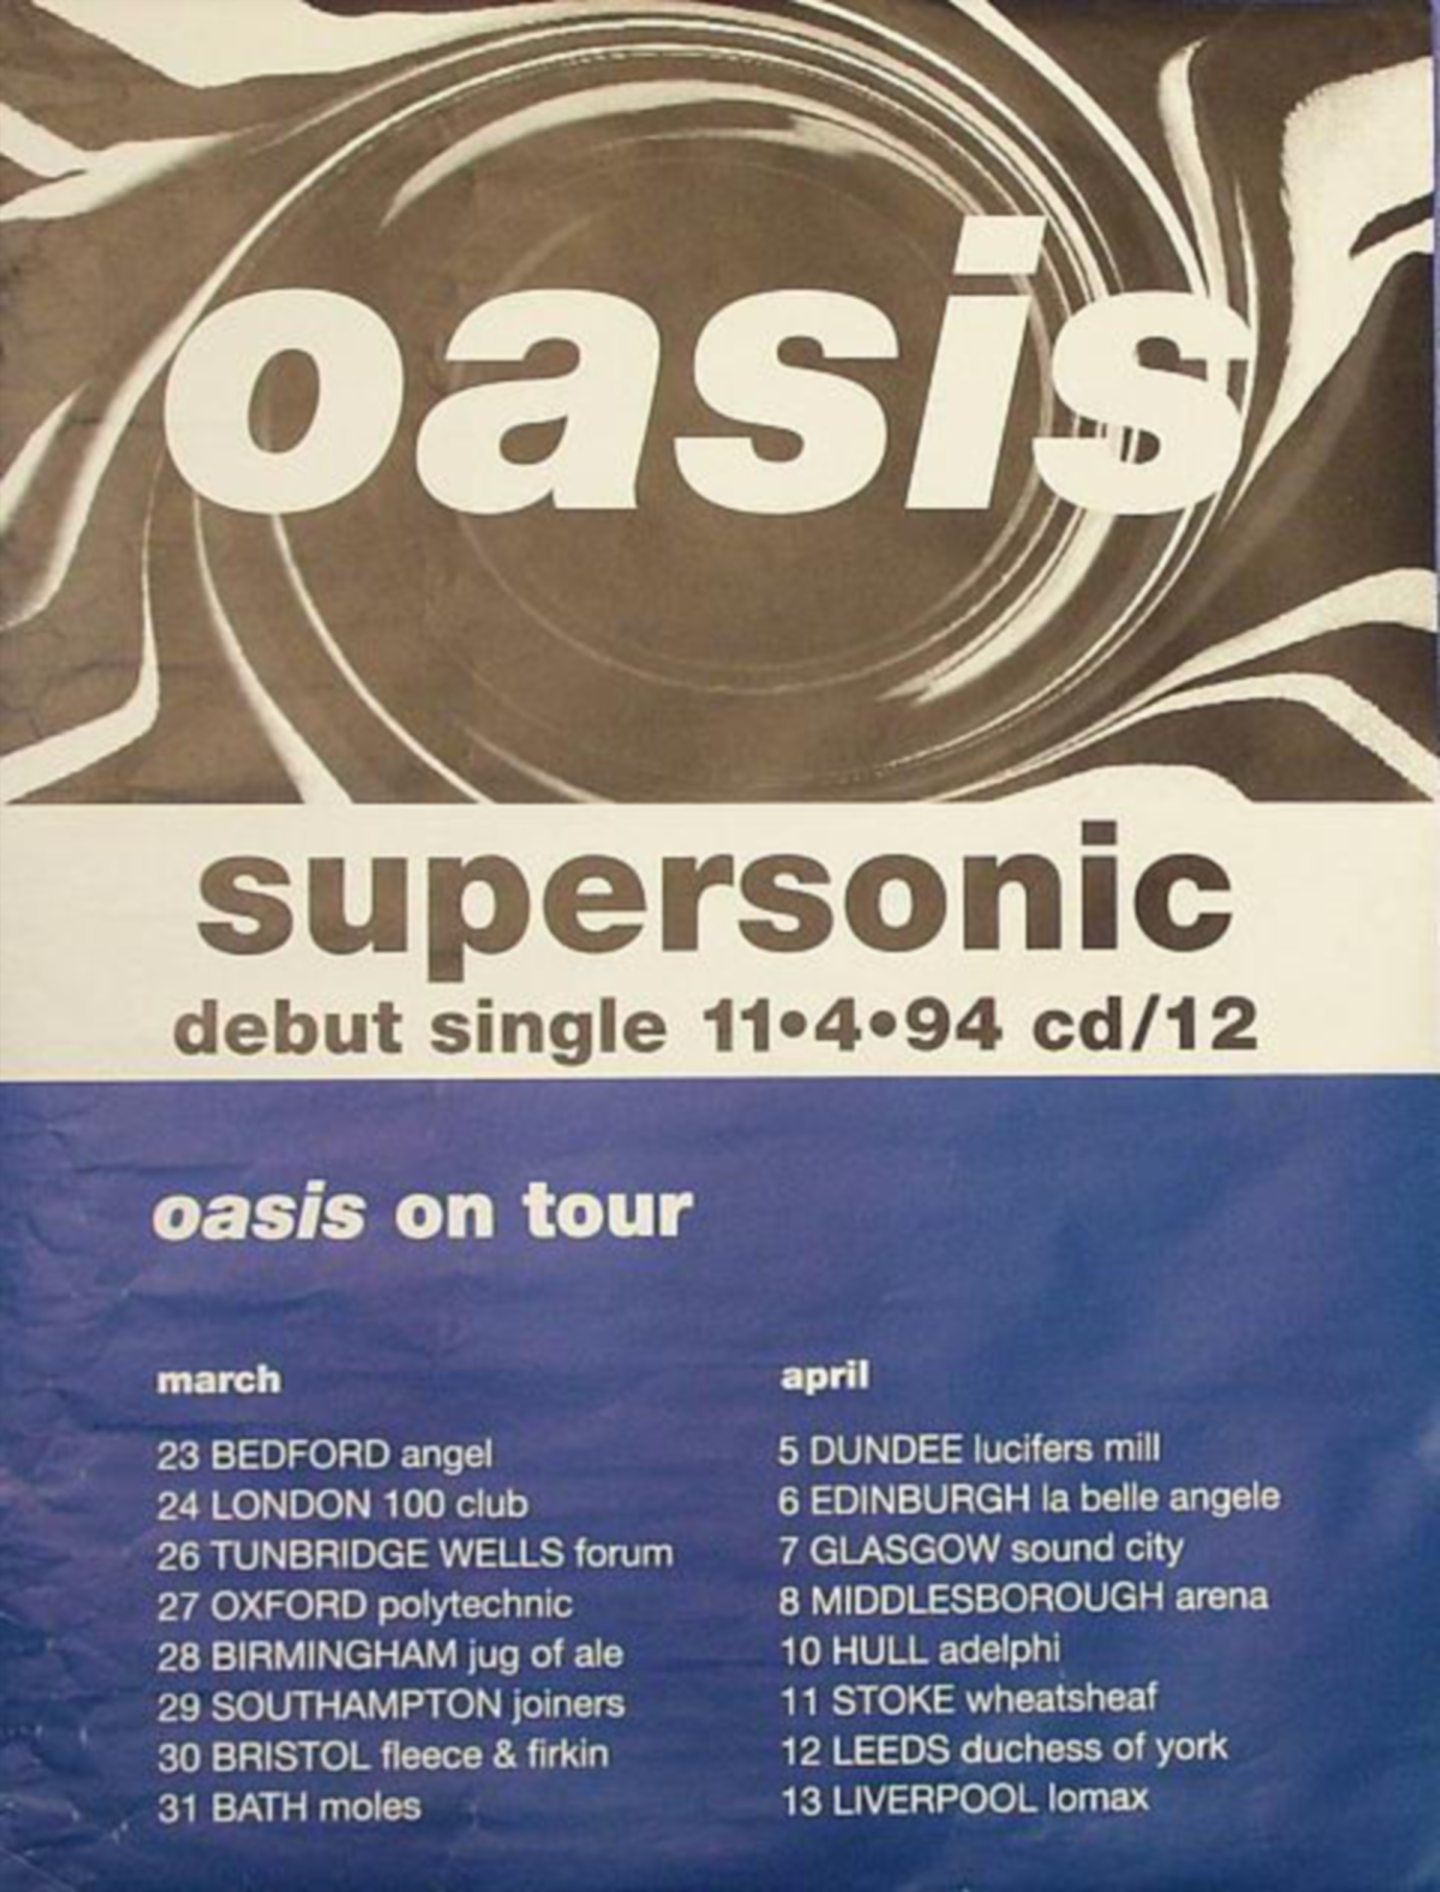 A poster for the Dundee gig by Noel Gallagher and Oasis.